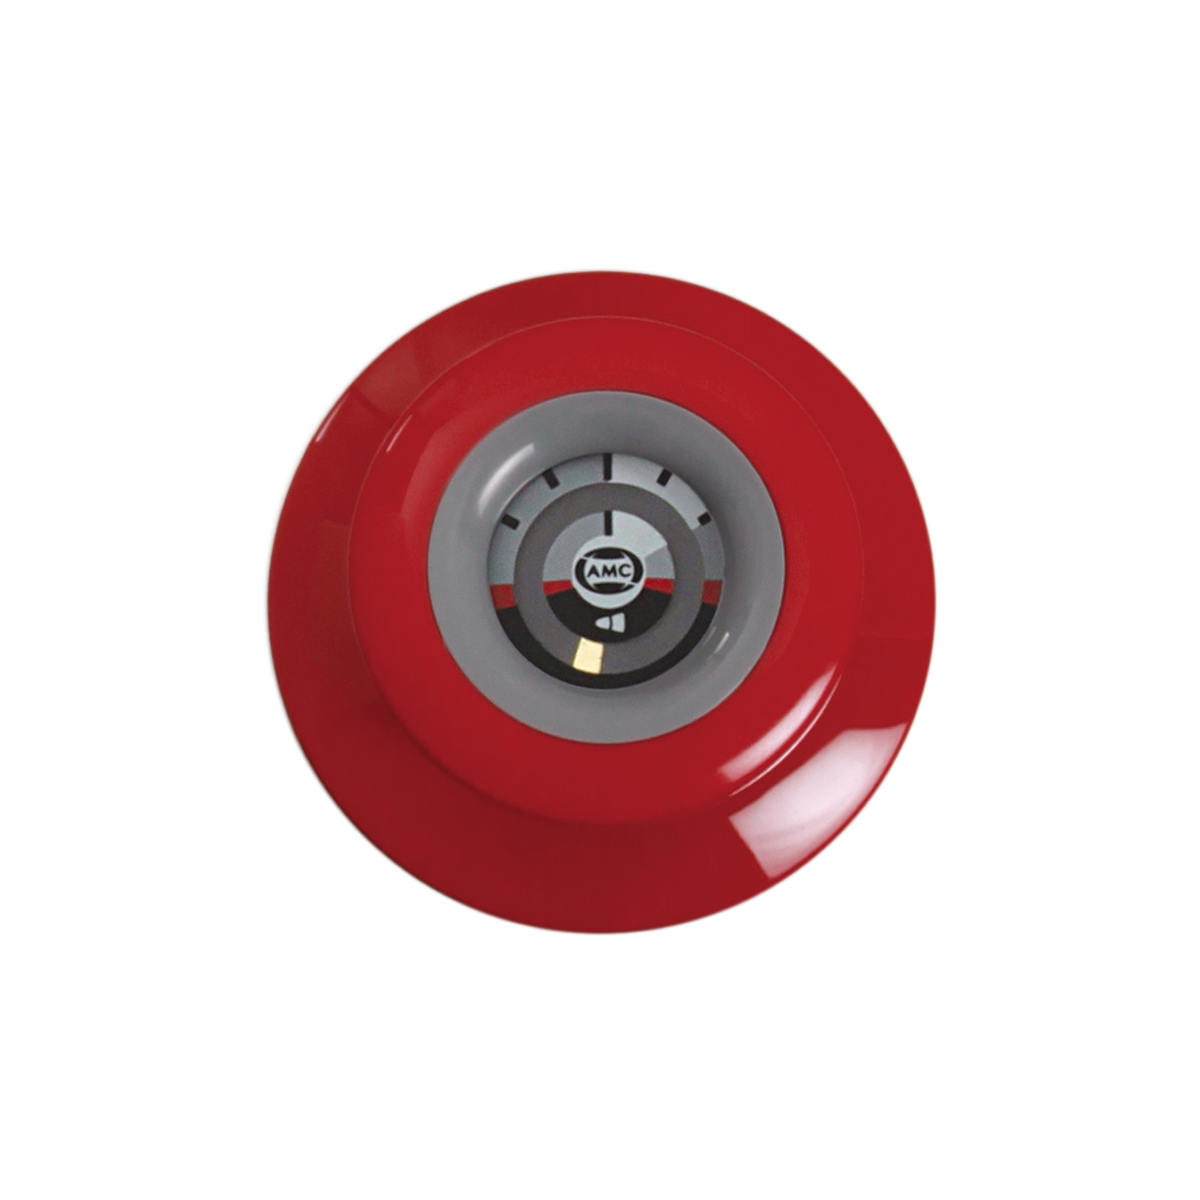 Product Image of the Red Visiotherm from AMC cookware